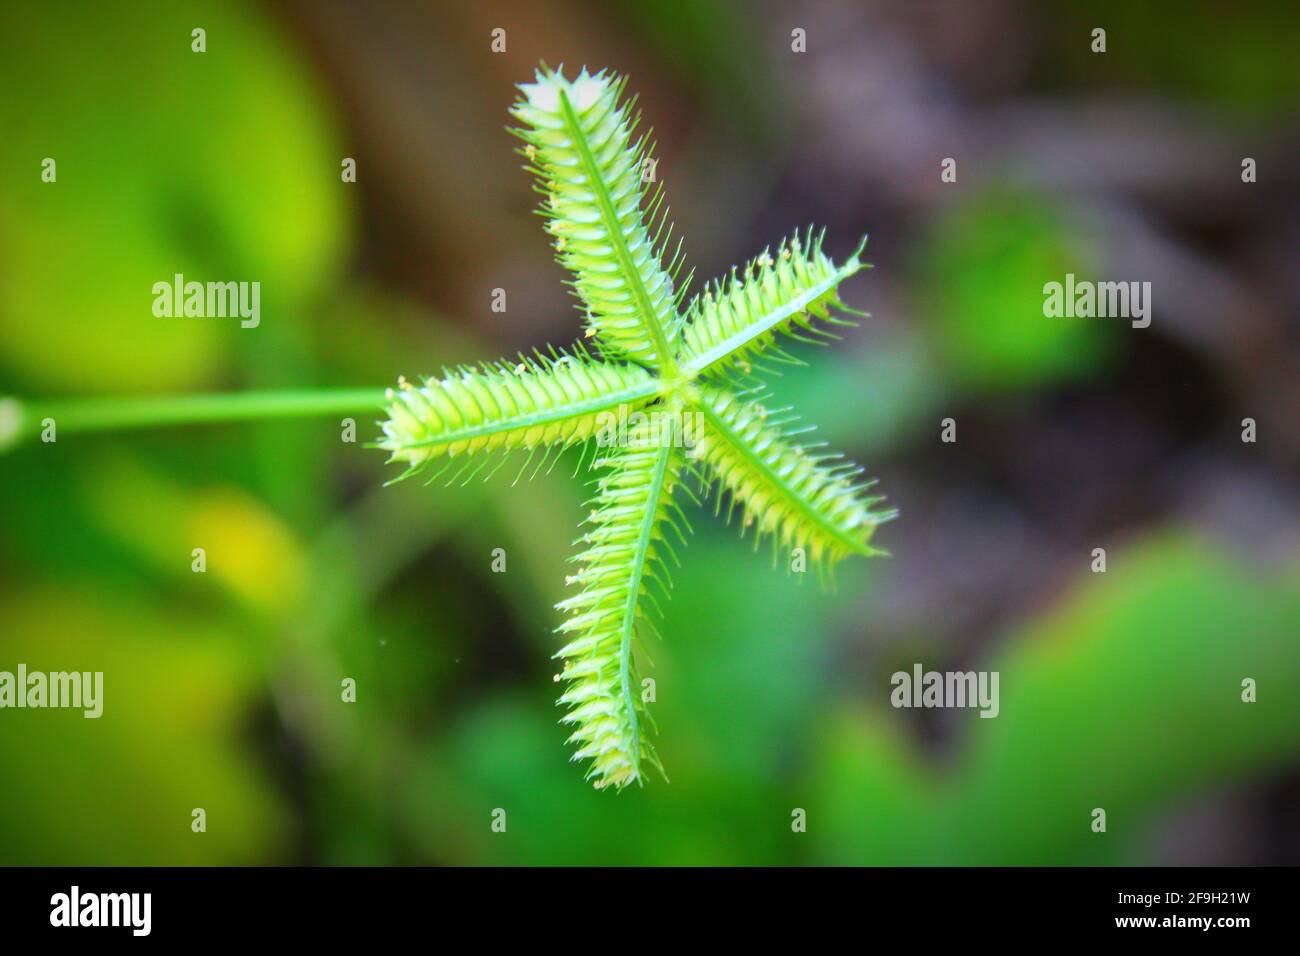 A closeup of the Egyptian crowfoot grass in the blurred natural background Stock Photo